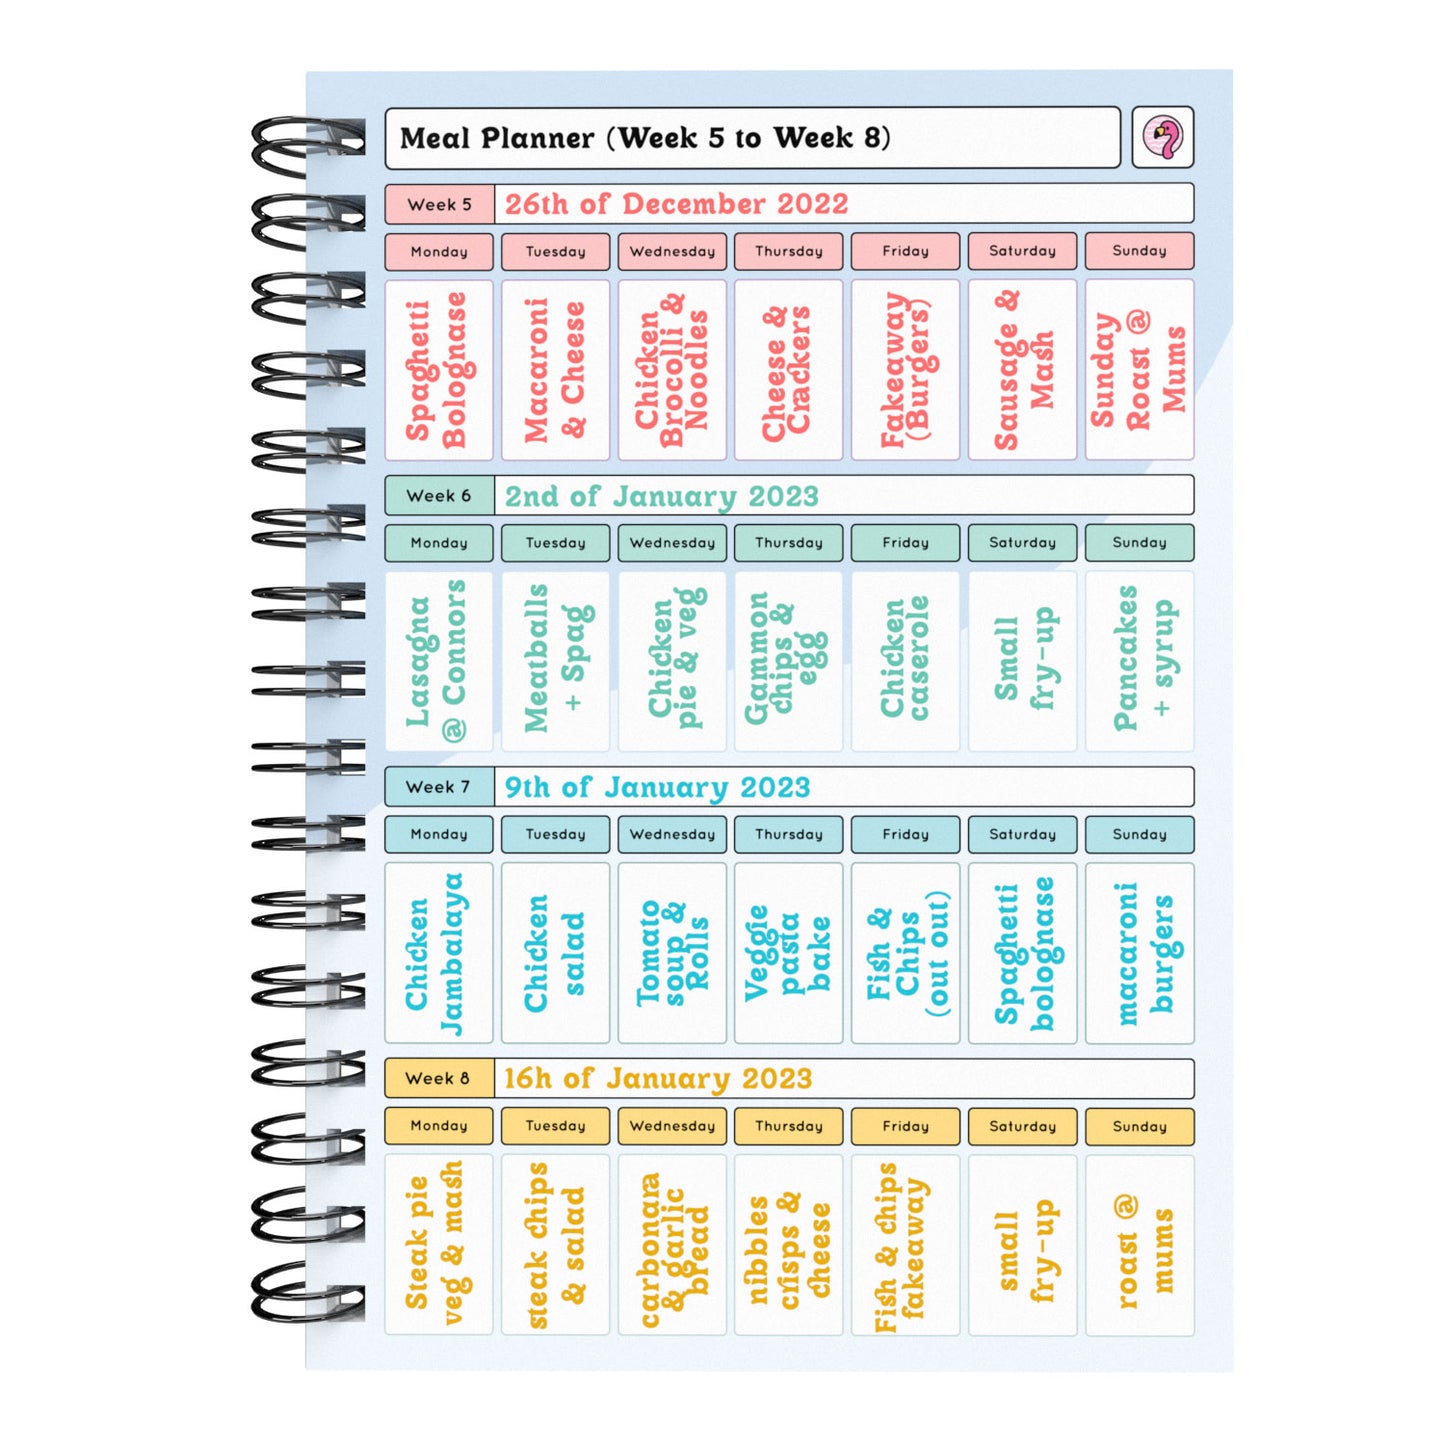 Food Diary - C53 - Calorie Counting